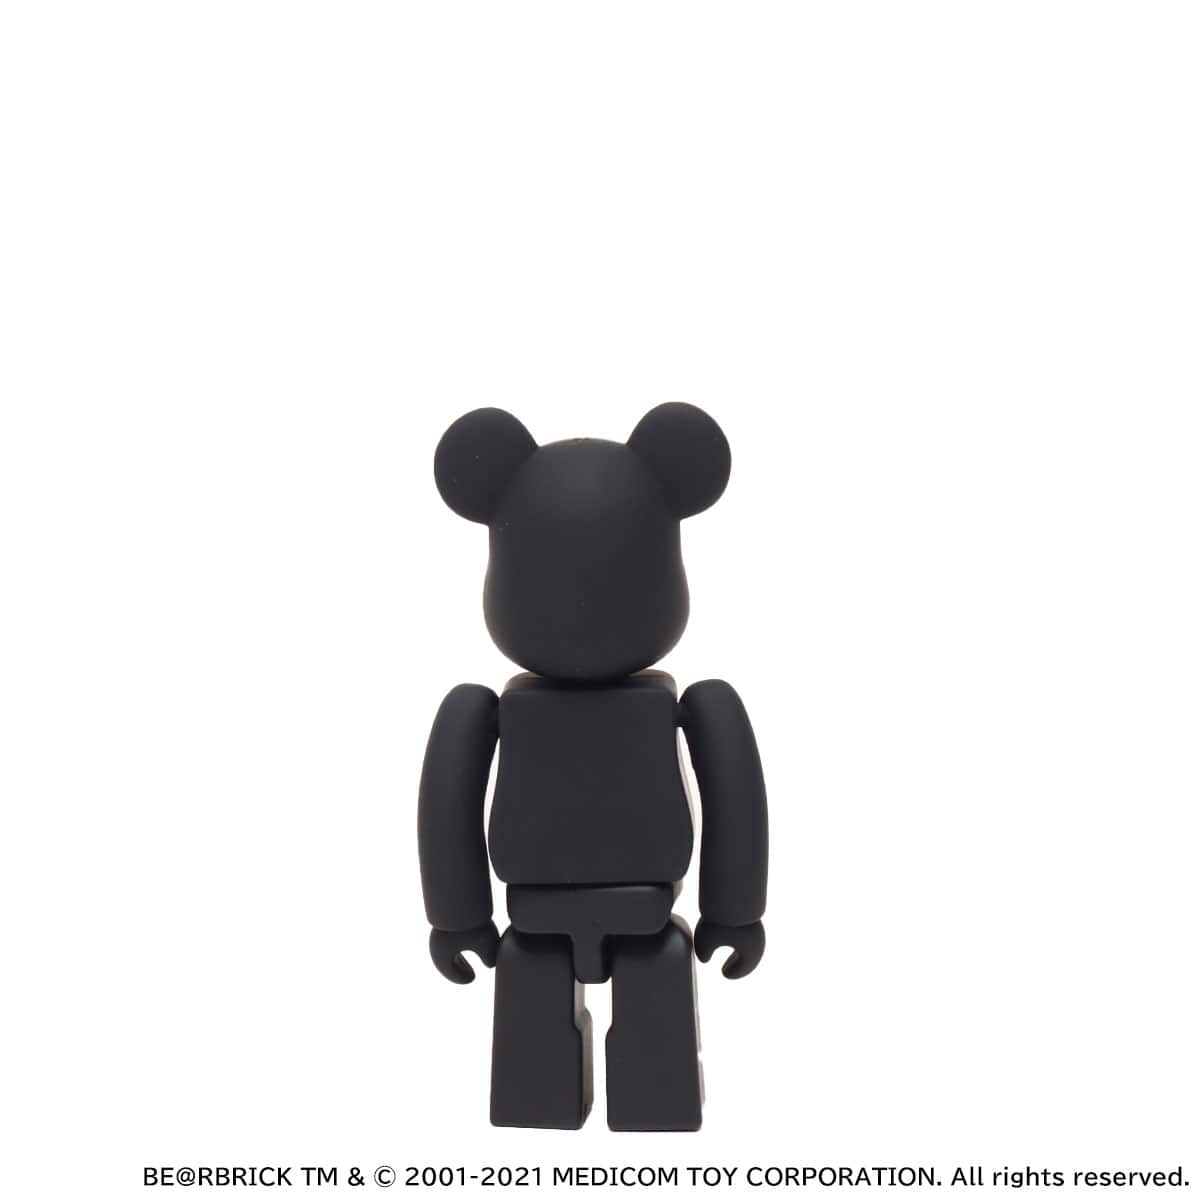 BE@RBRICK atmos x WIND AND SEA 100% & 400% 21SS-S